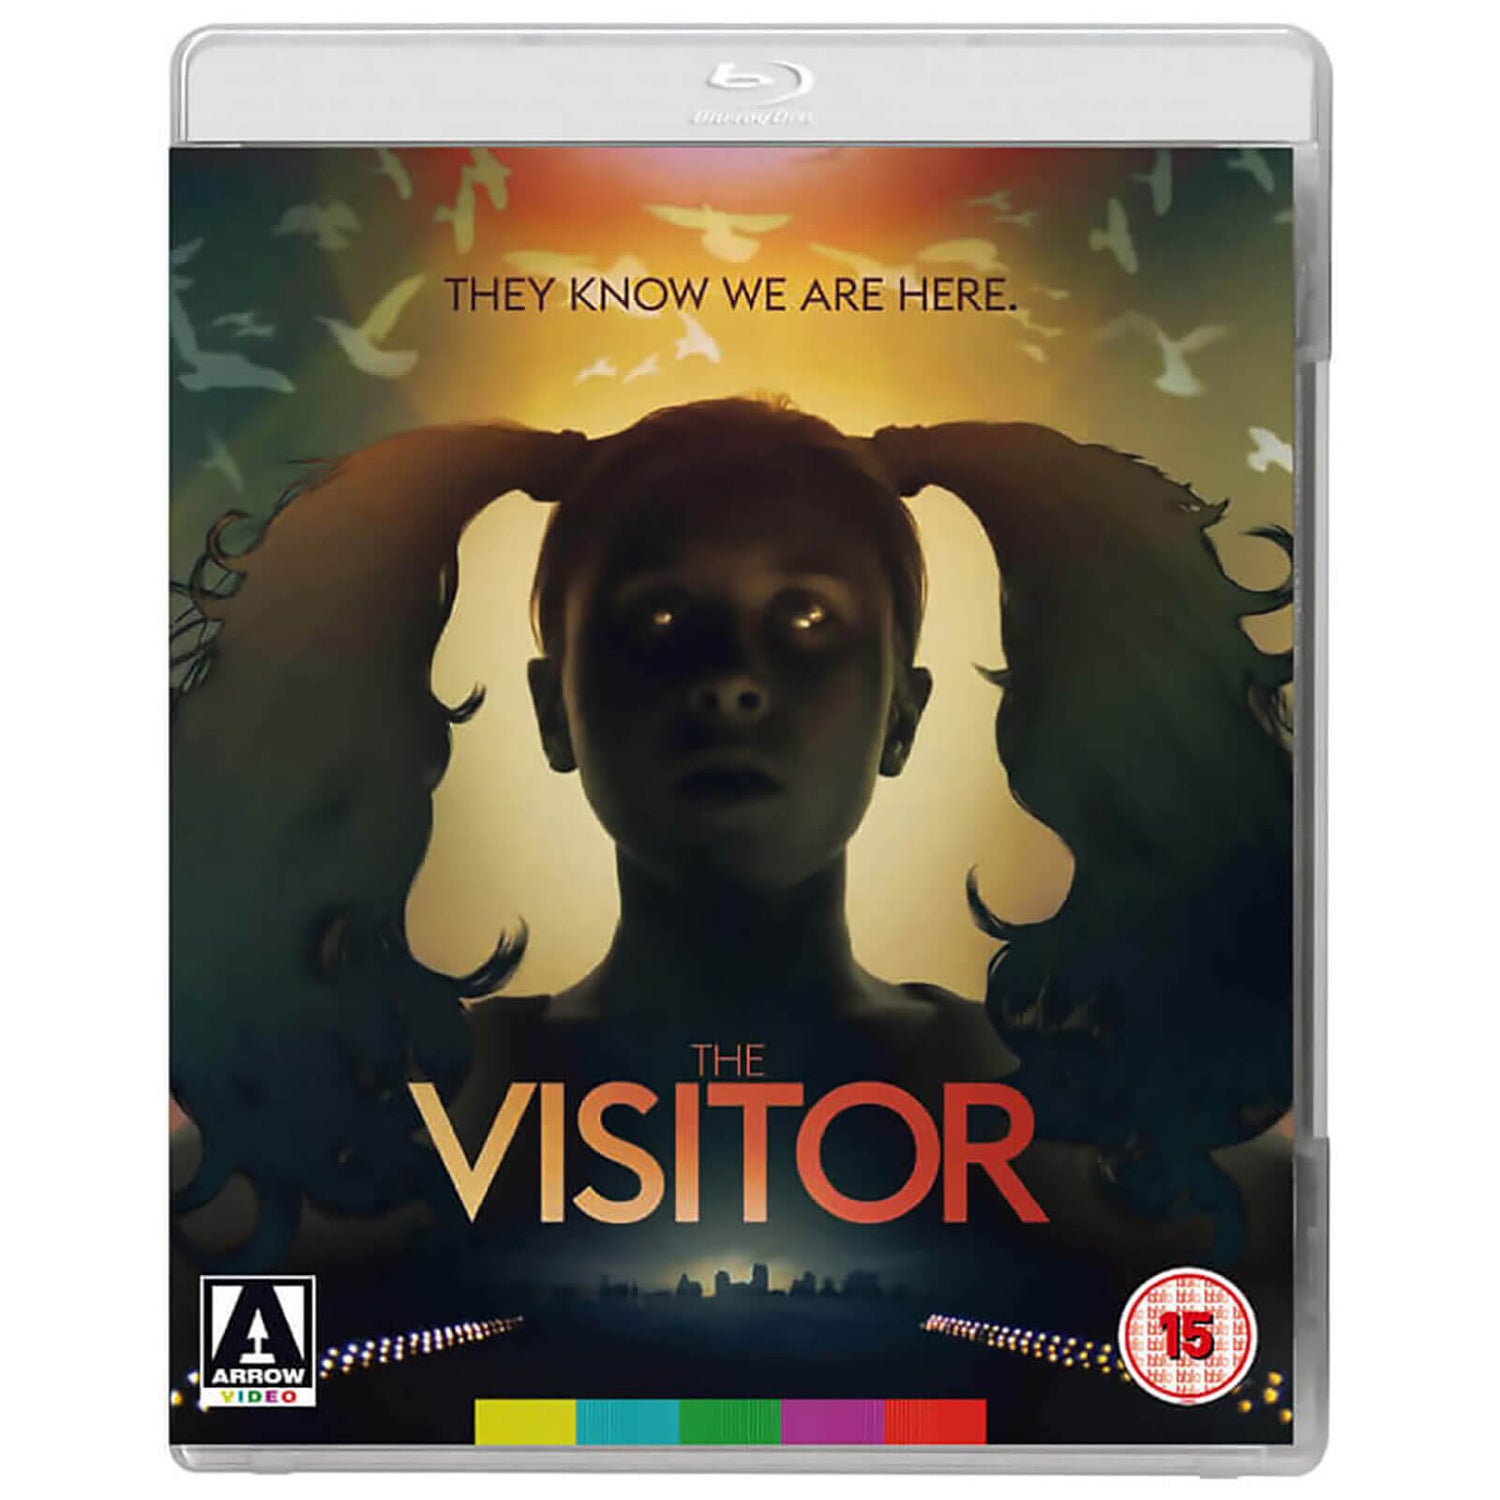 The Visitor Blu-ray